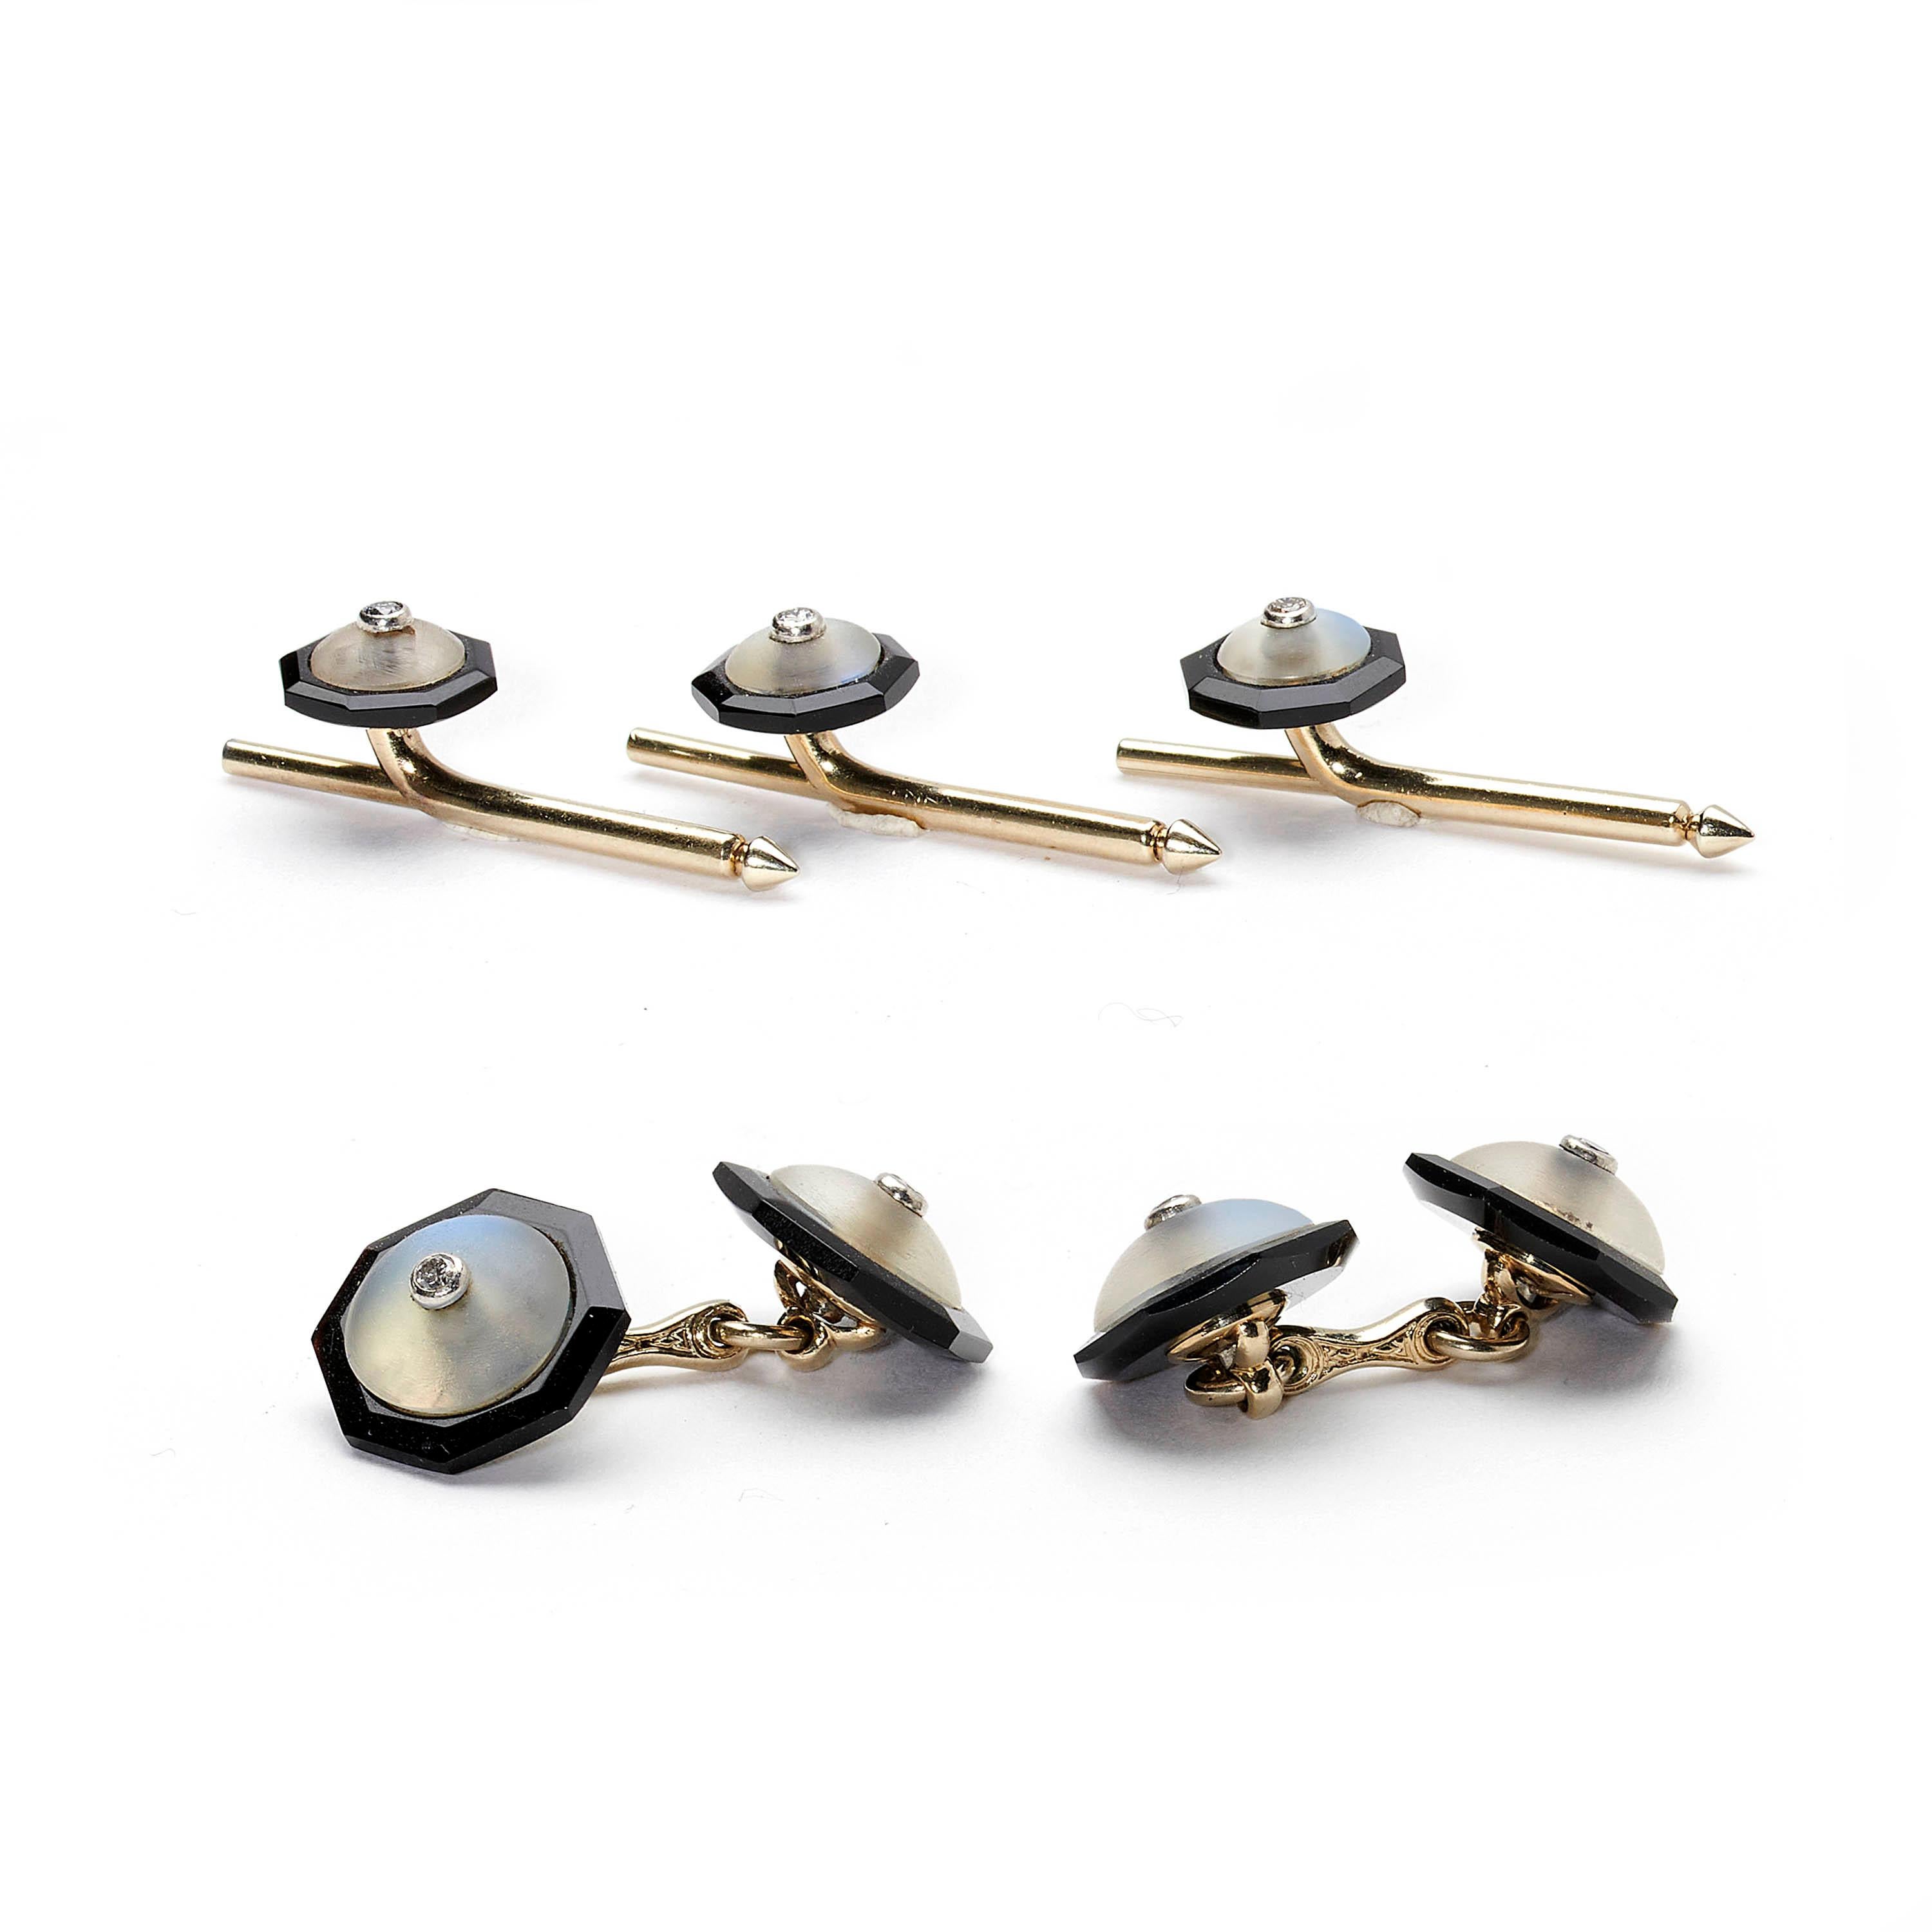 A frosted rainbow moonstone and black onyx dress-set, comprising of a pair of cufflinks and three studs, with rub-over set diamonds in the centres, surrounded by domed frosted rainbow moonstone, set in octagonal black onyx, with yellow gold